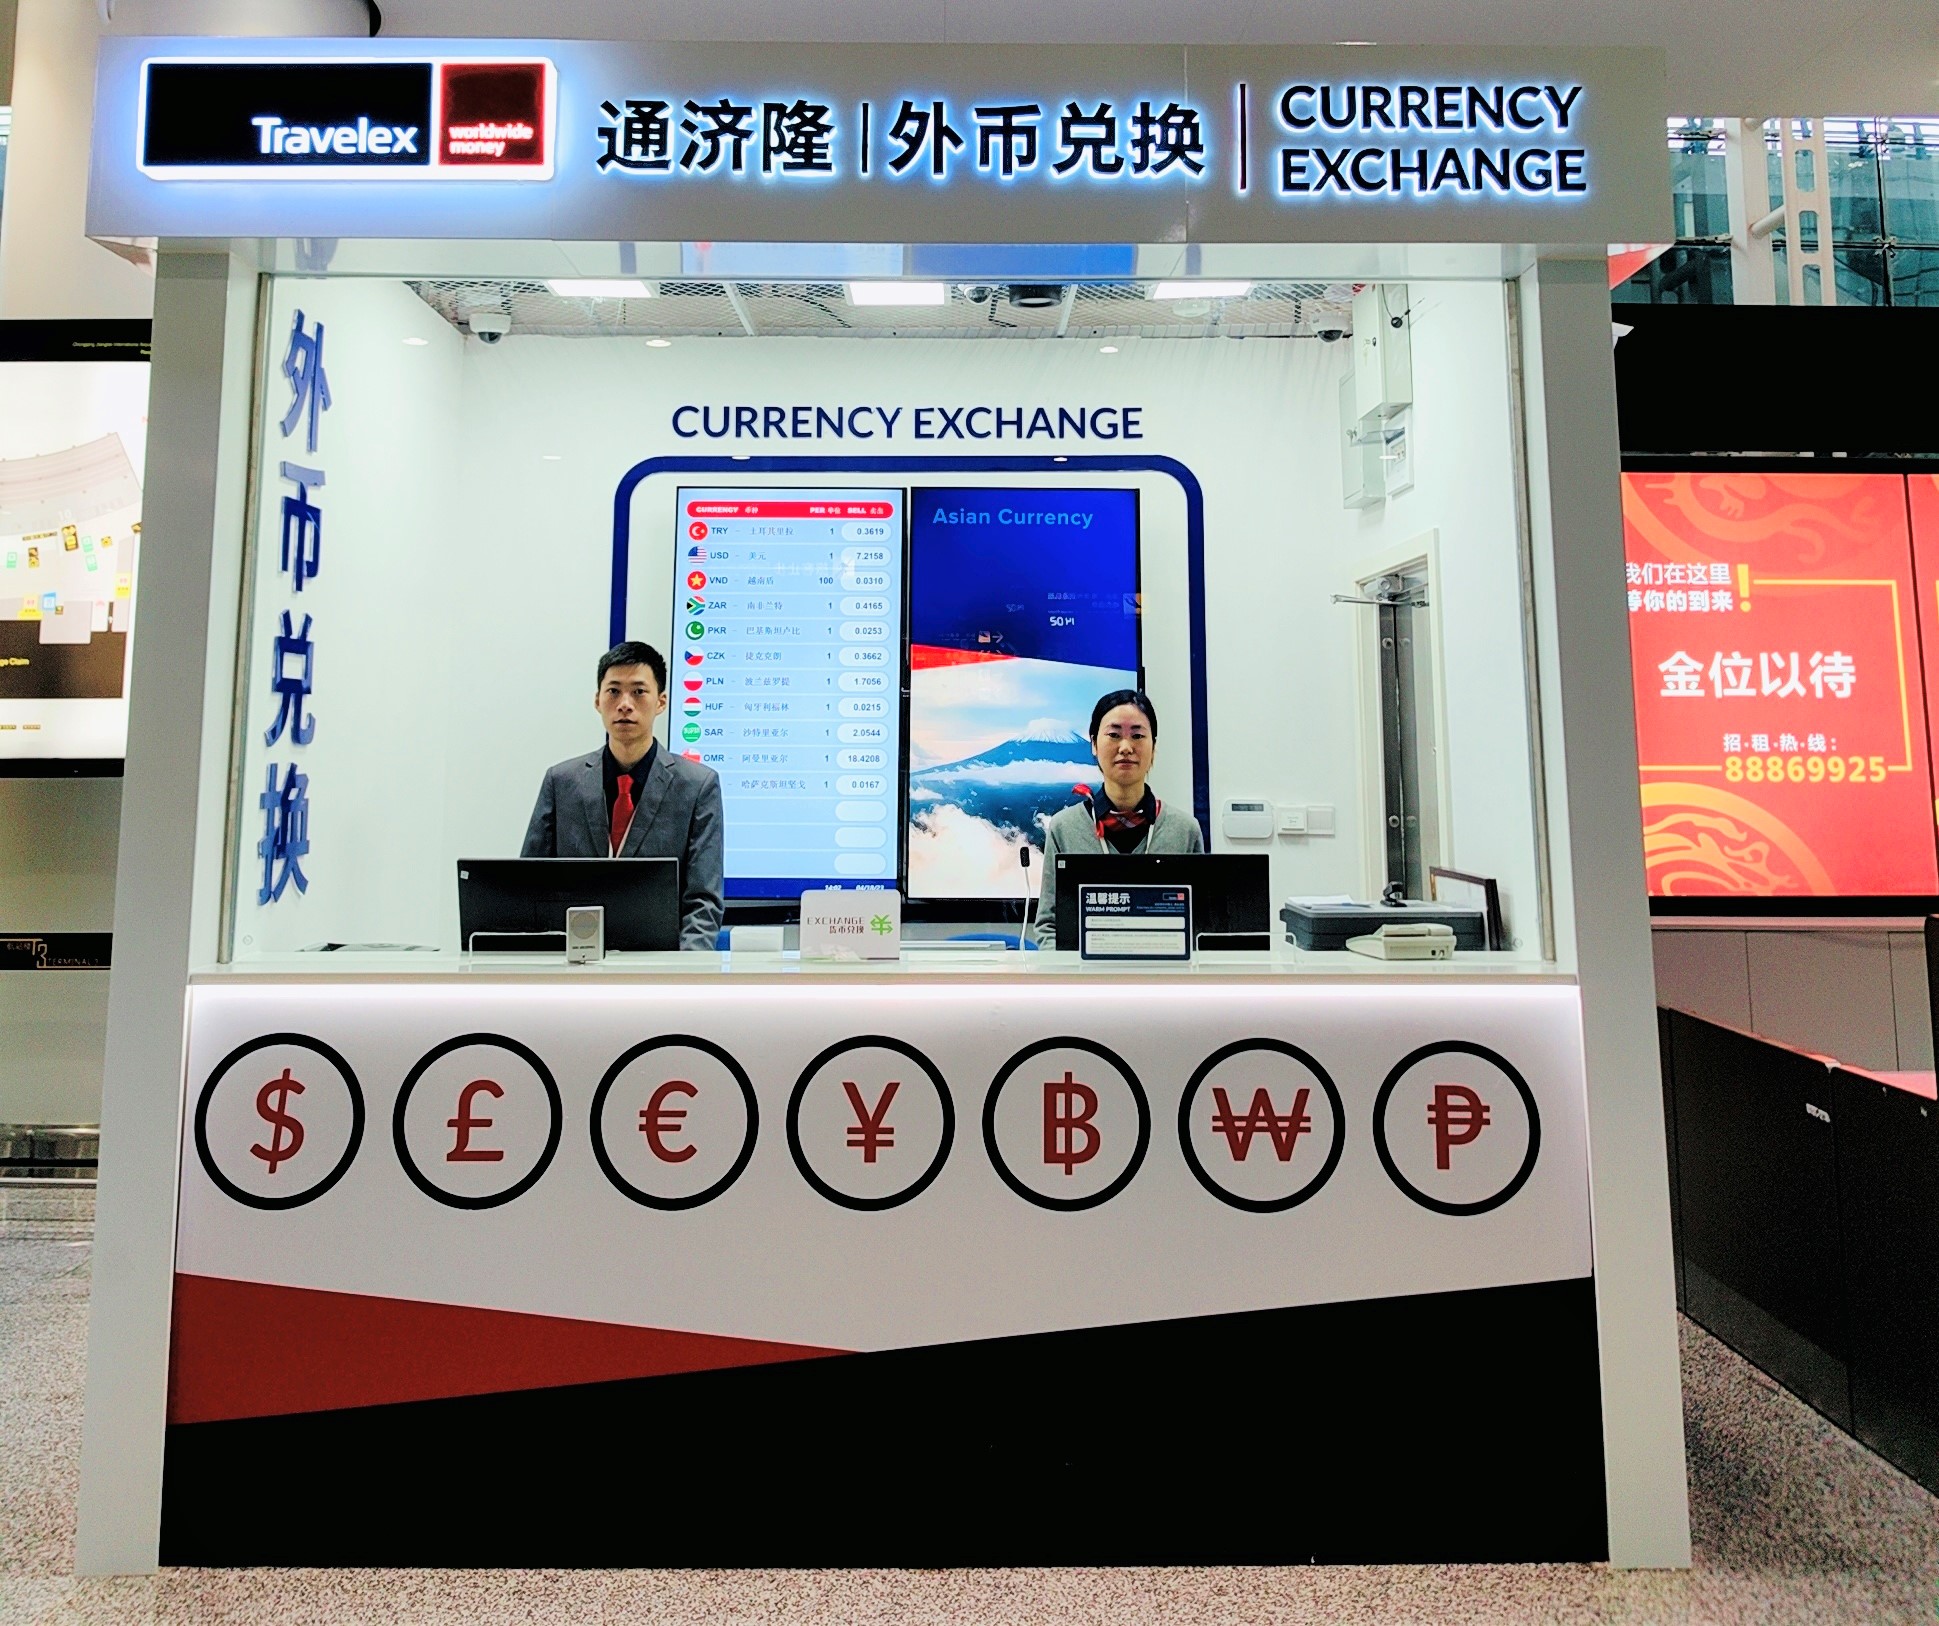 Man and woman sitting inside Travelex branded currency exchange booth